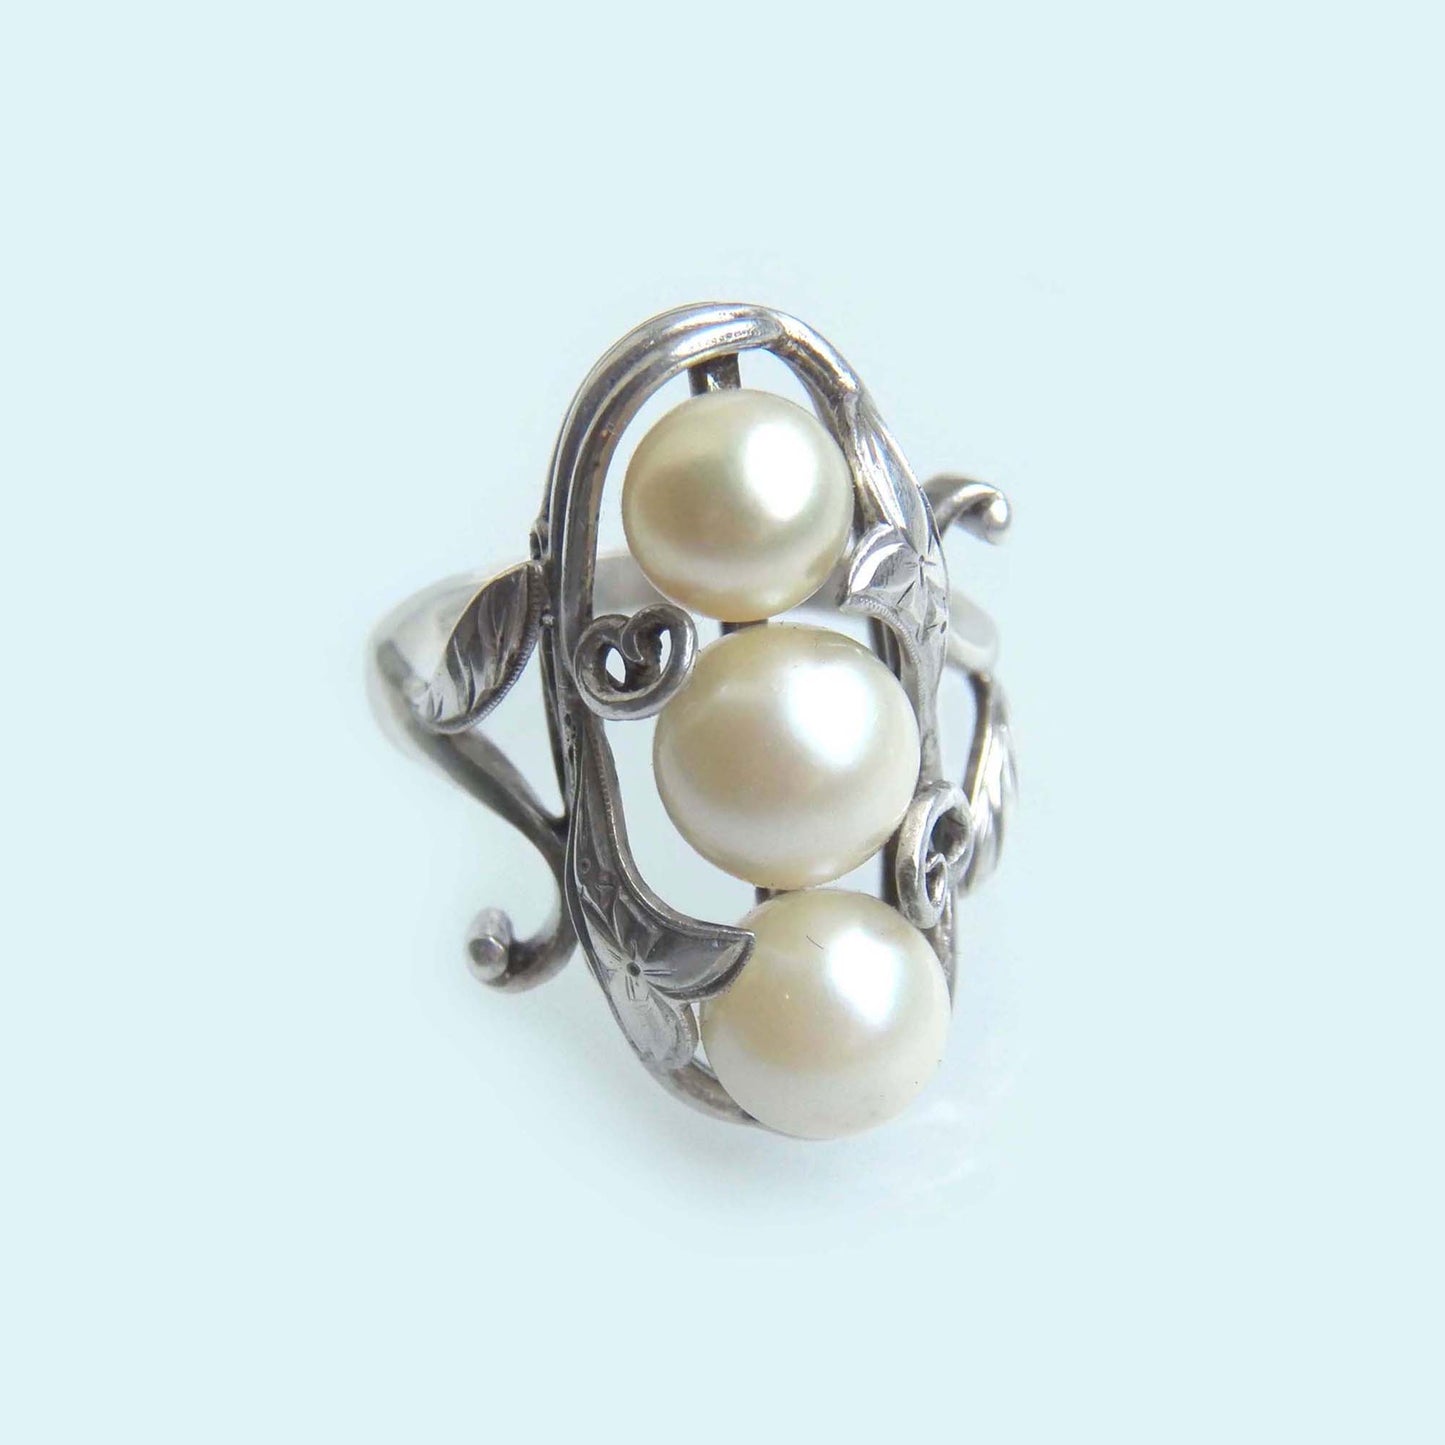  Antique Akoya Pearl Ring in Sterling Silver 1920s 